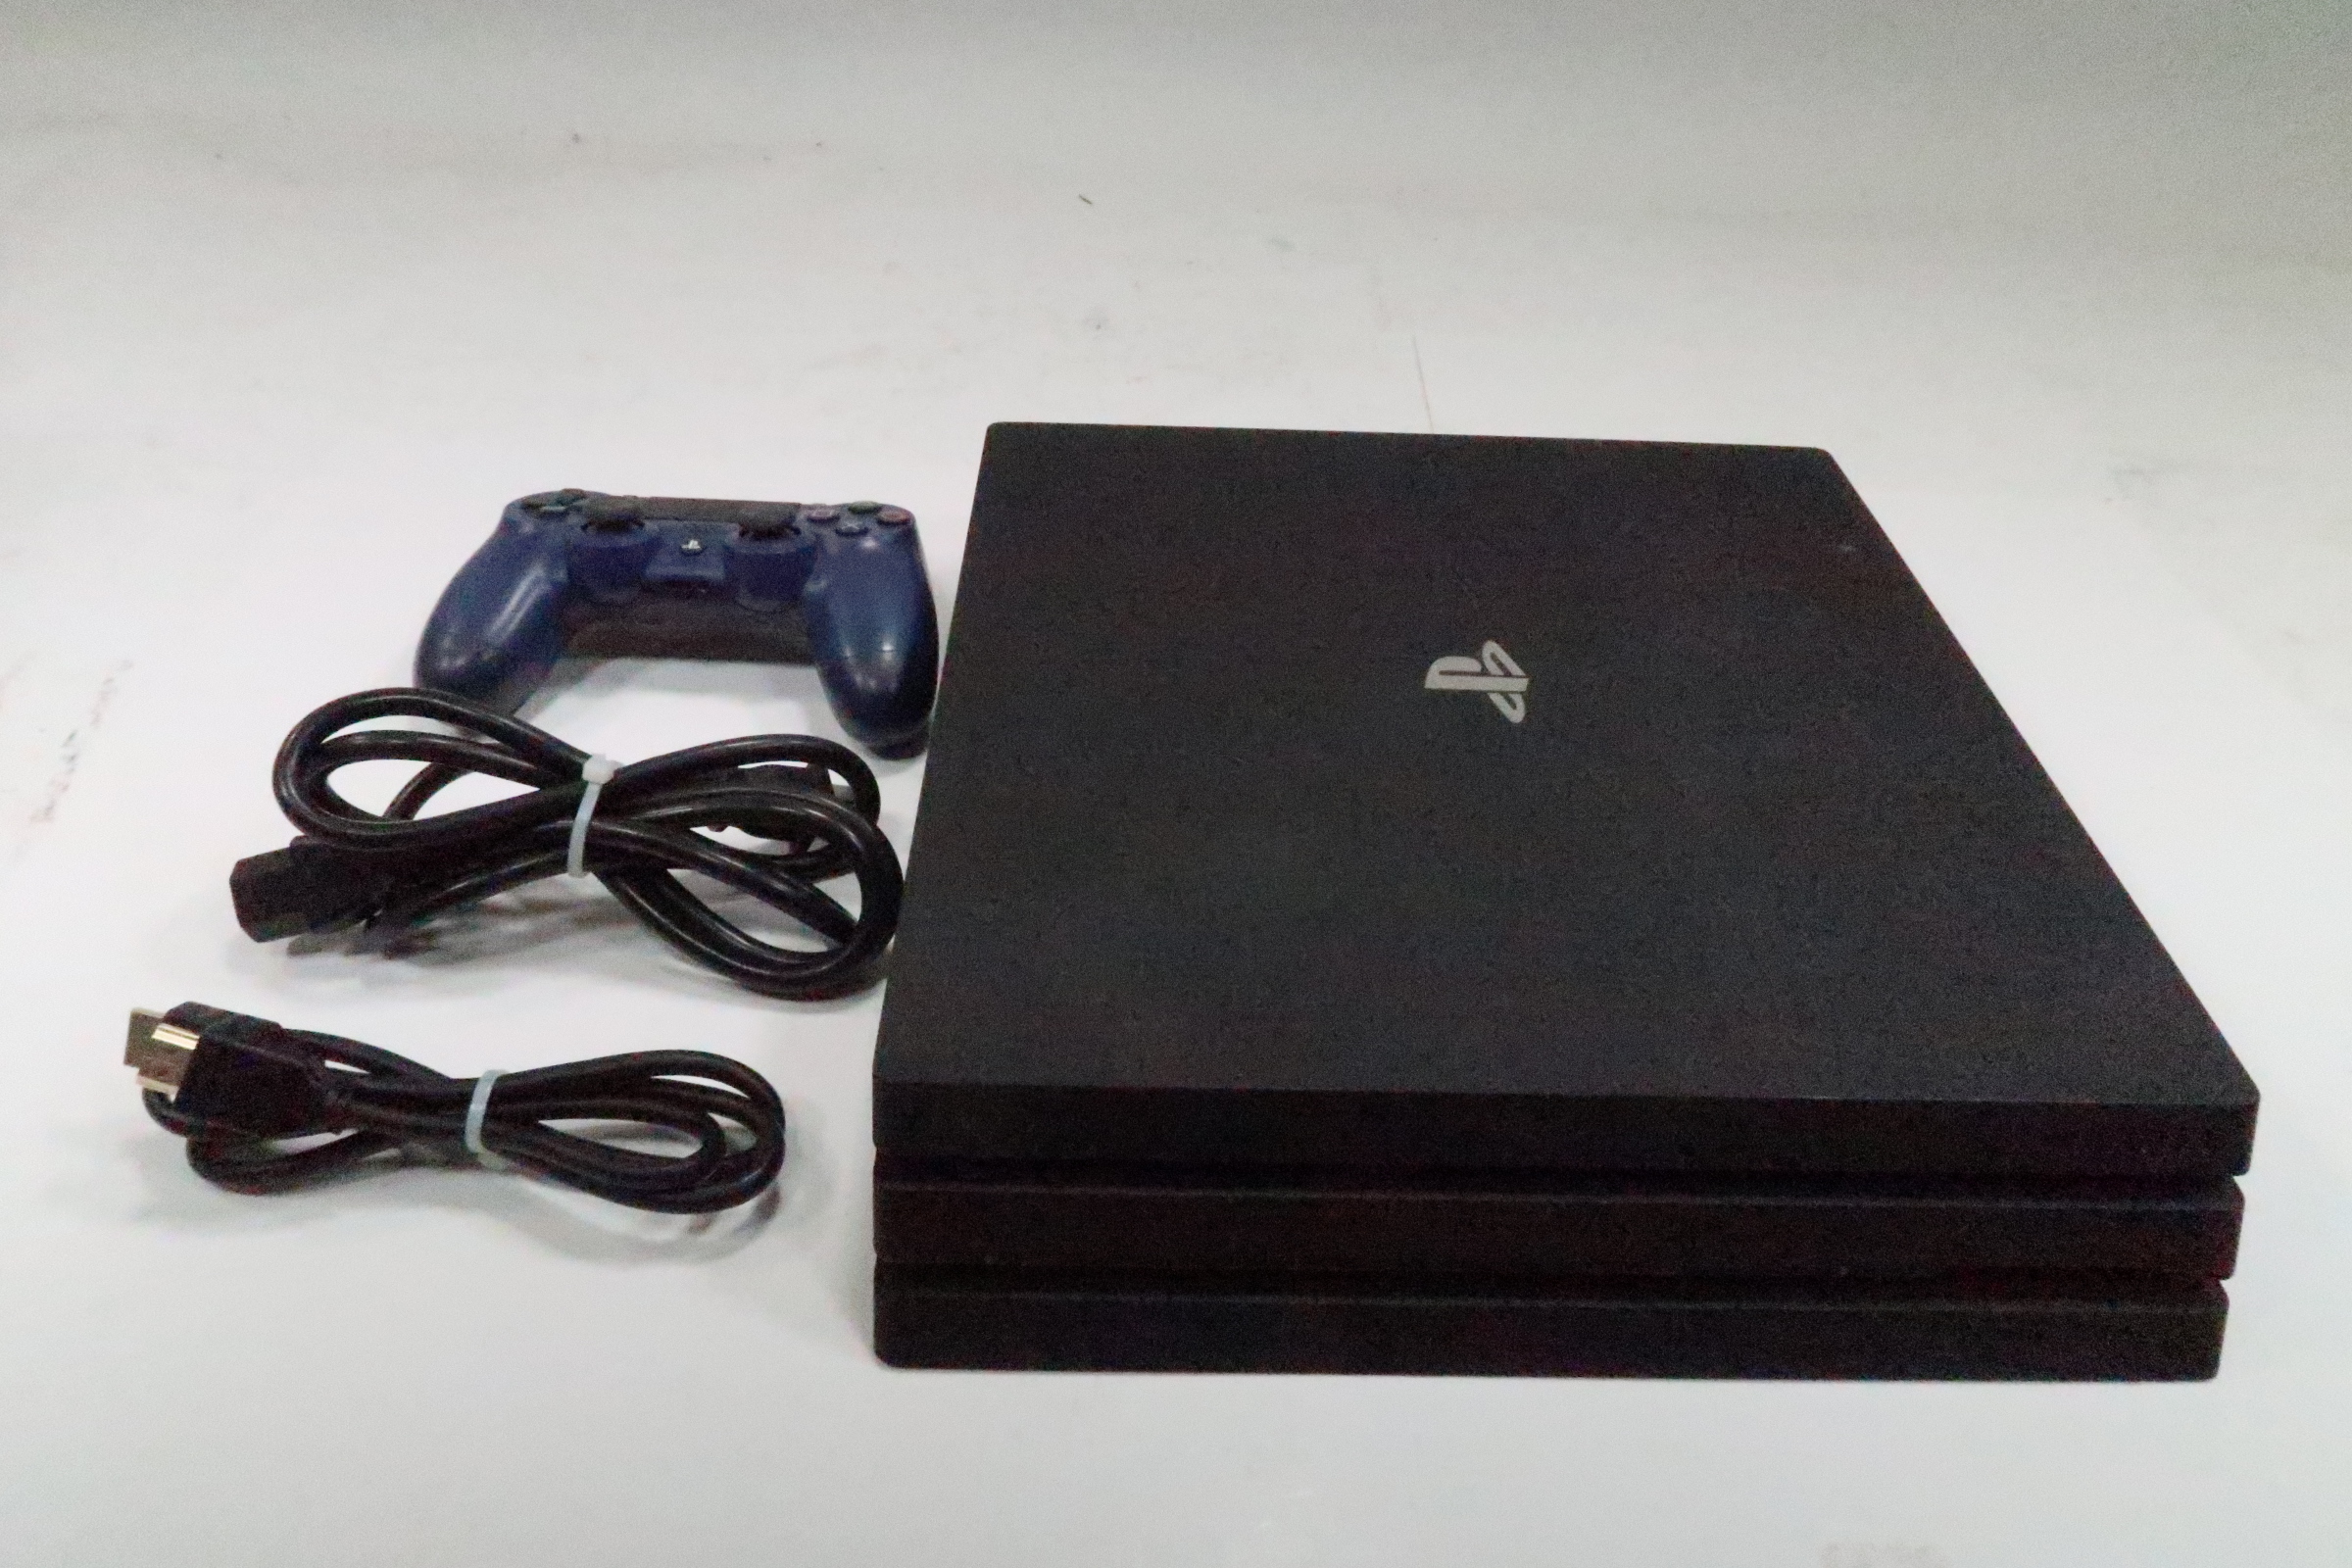 Sony CUH-7015B PlayStation 4 Pro 1TB Video Game Console 8430